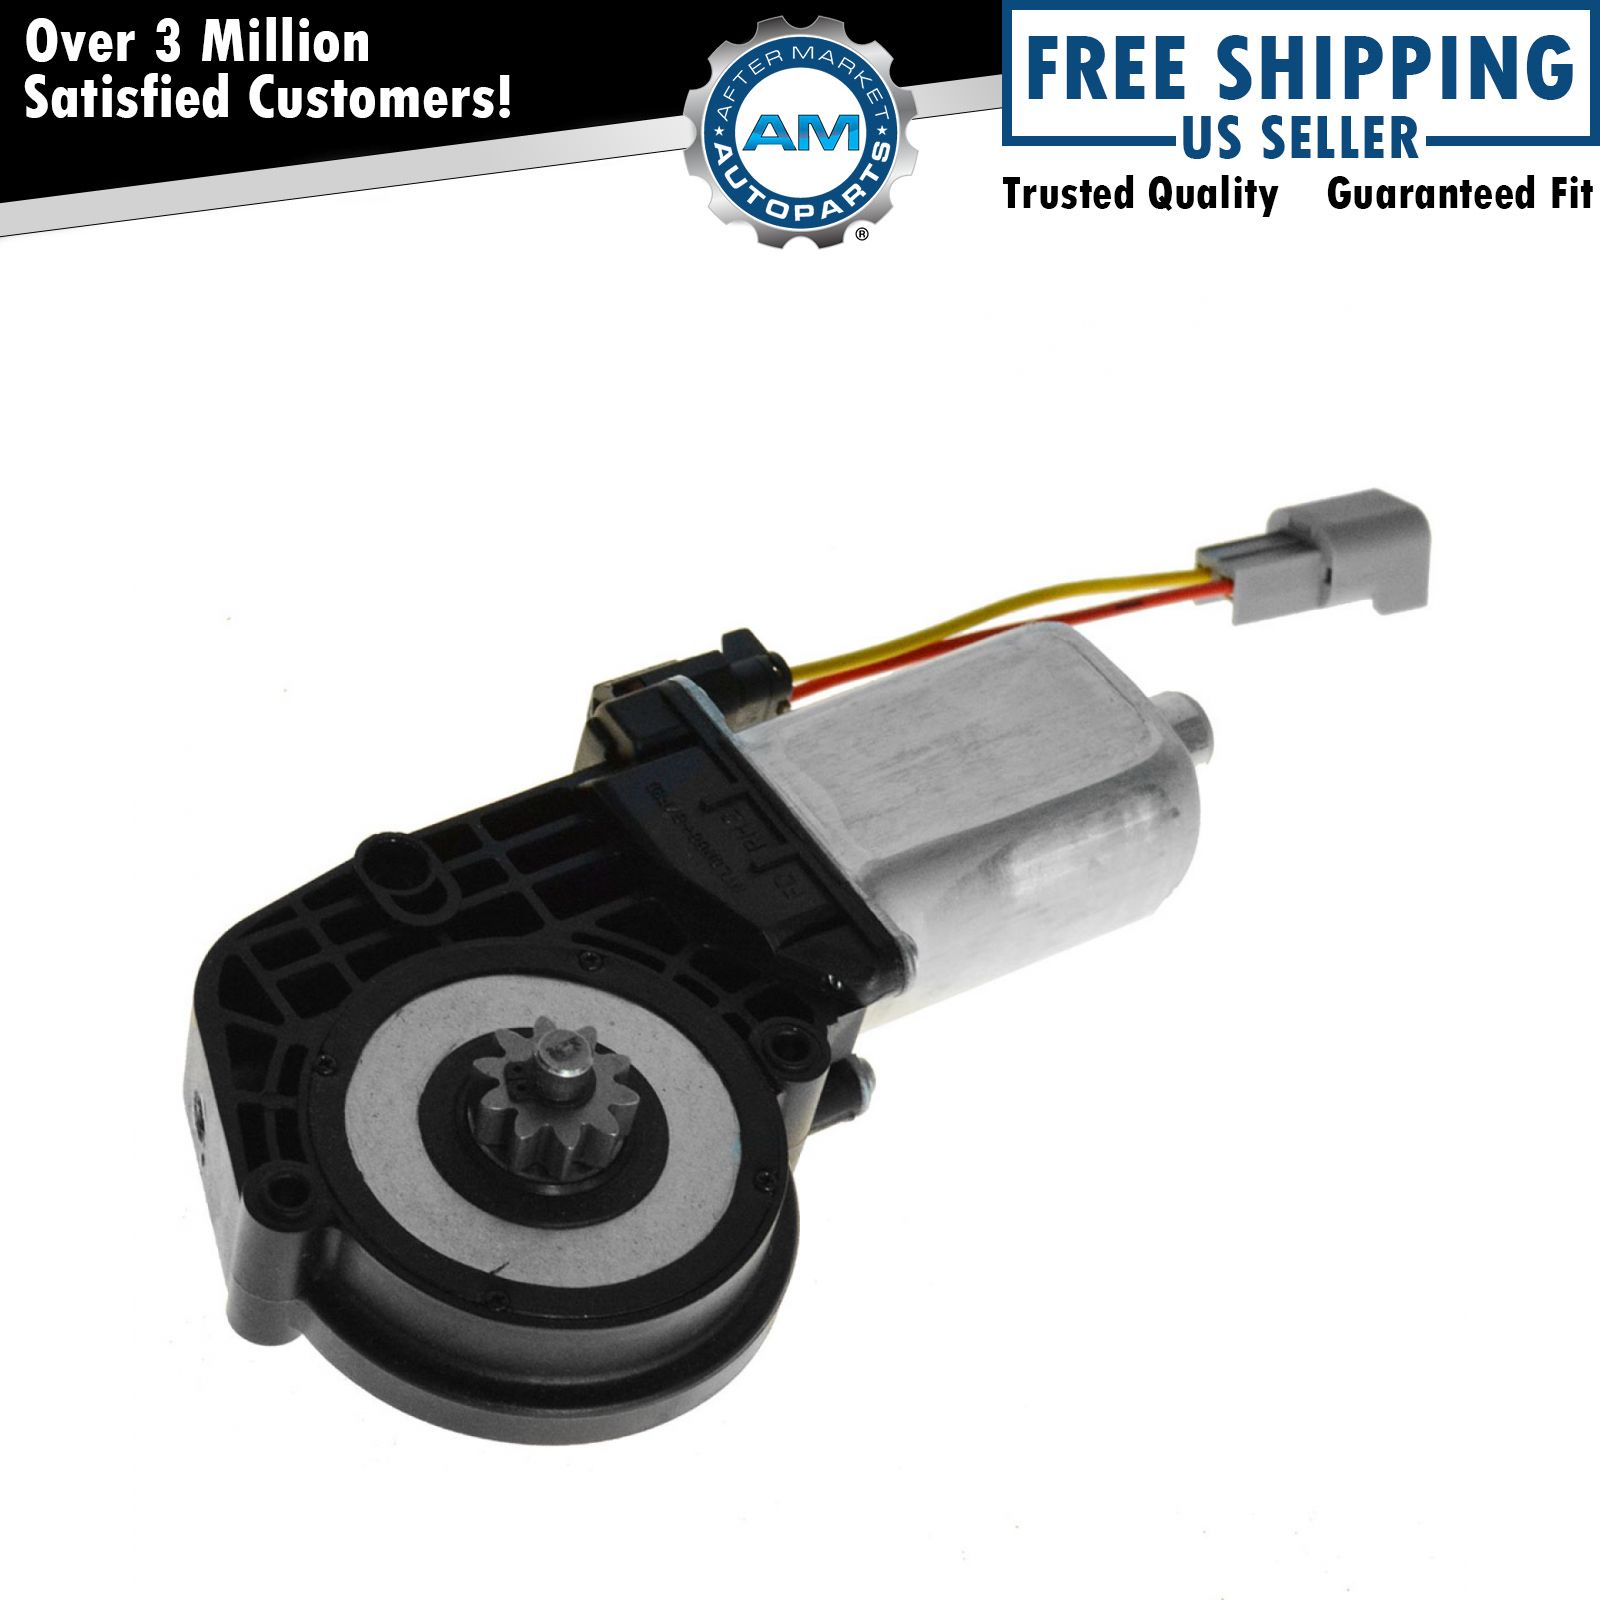 Dorman Power Window Motor for ford Excursion F250 F350 F450 F550 Pickup Truck